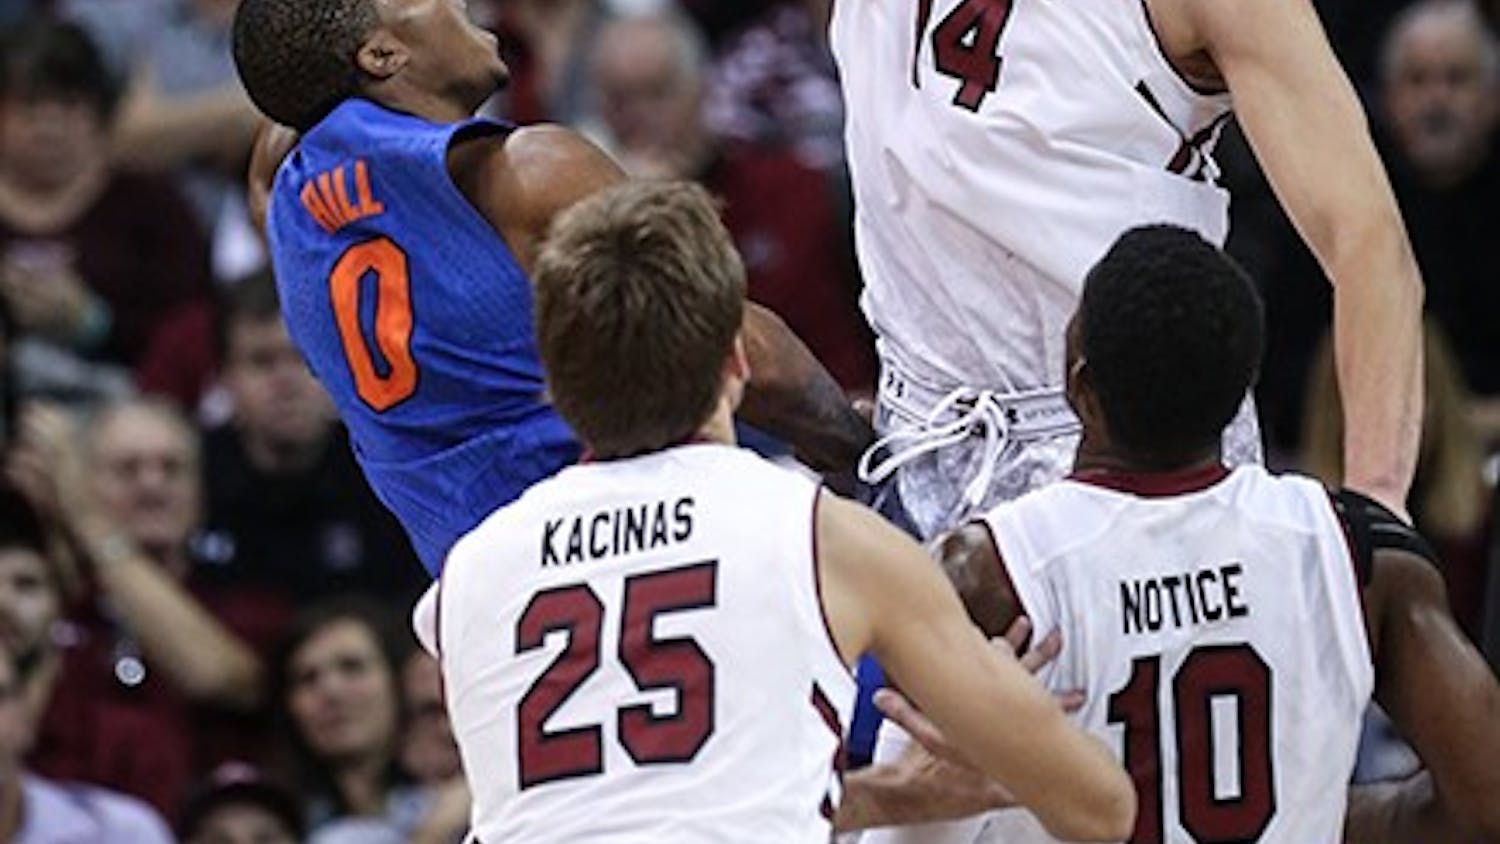 South Carolina forward Laimonas Chatkevicius (14) blocks a shot by Florida guard Kasey Hill (0) during the first half on Wednesday, Jan. 7, 2015, at Colonial Life Arena in Columbia, S.C. (Tracy Glantz/The State/TNS)